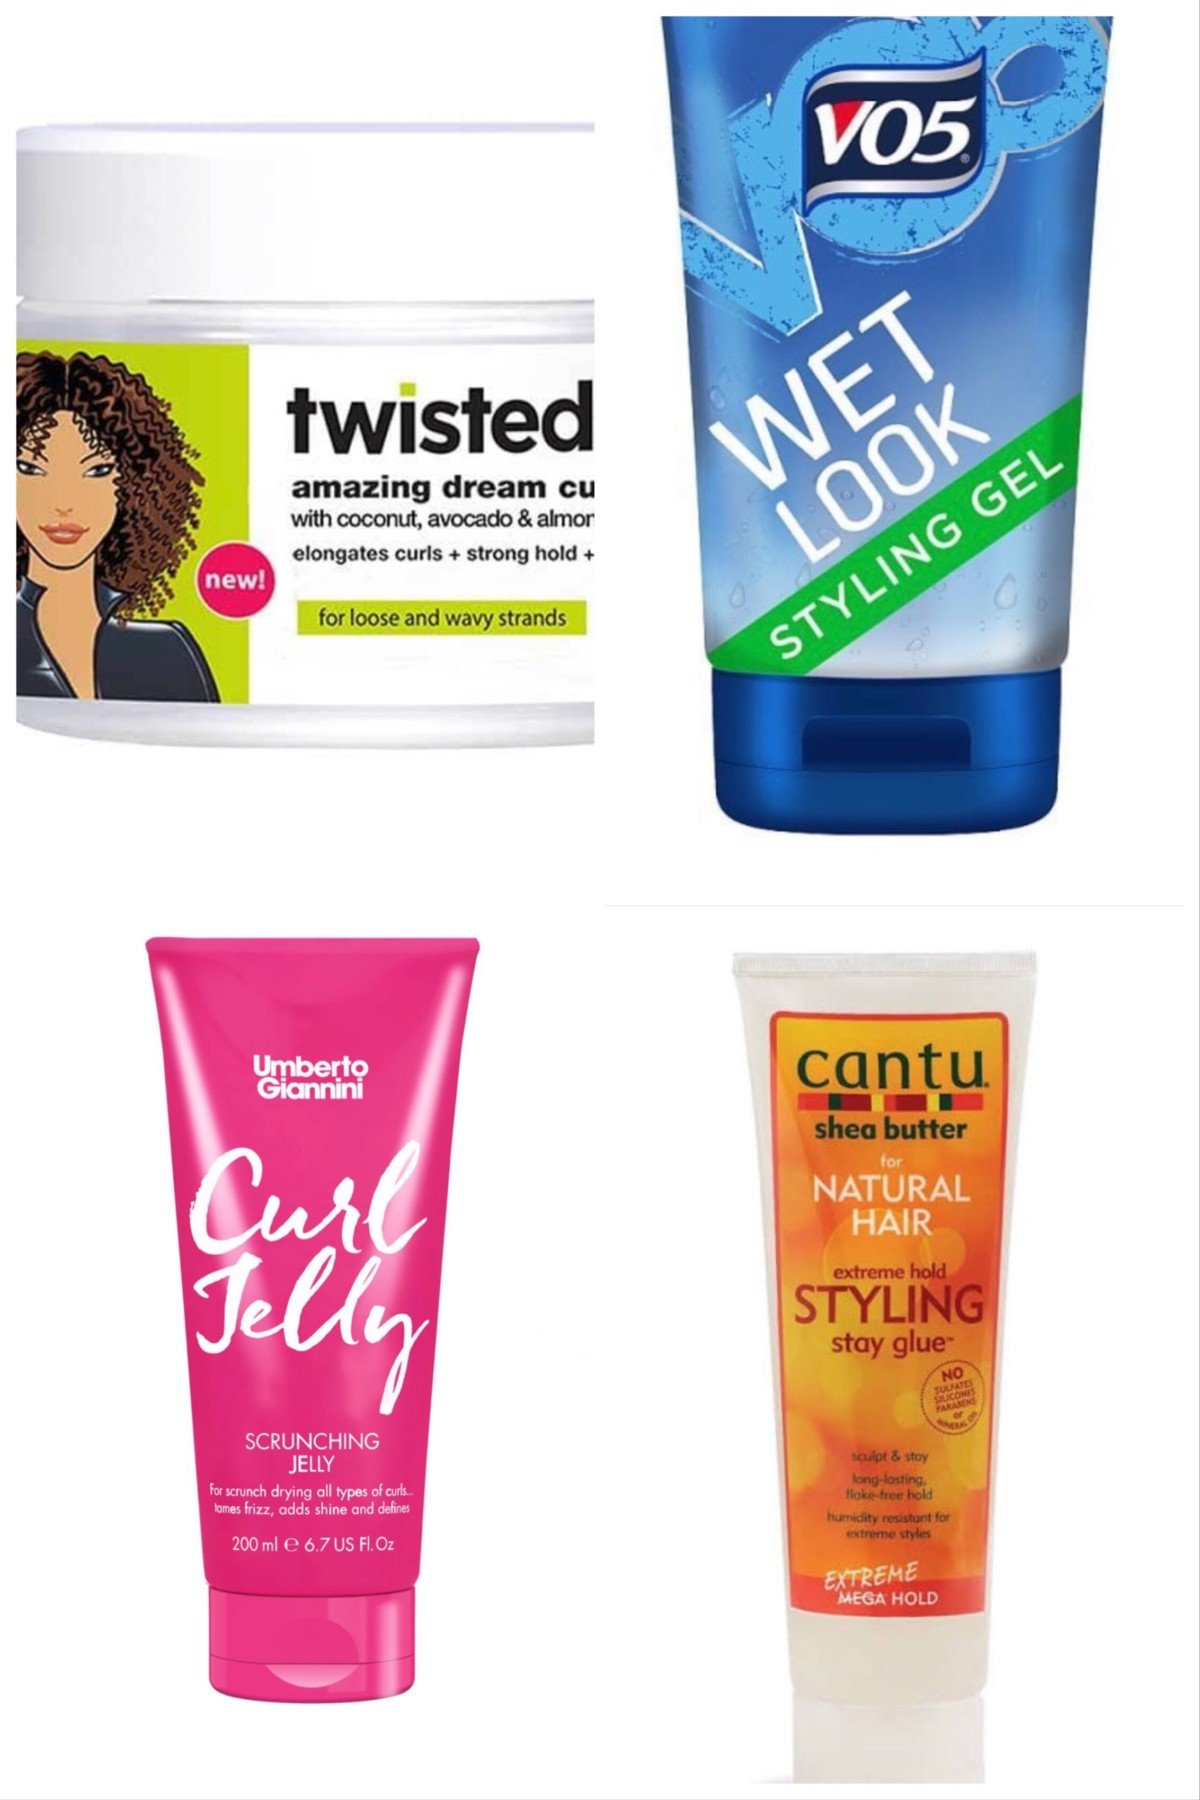 Curly girl method gels from UK supermarkets and drugstores